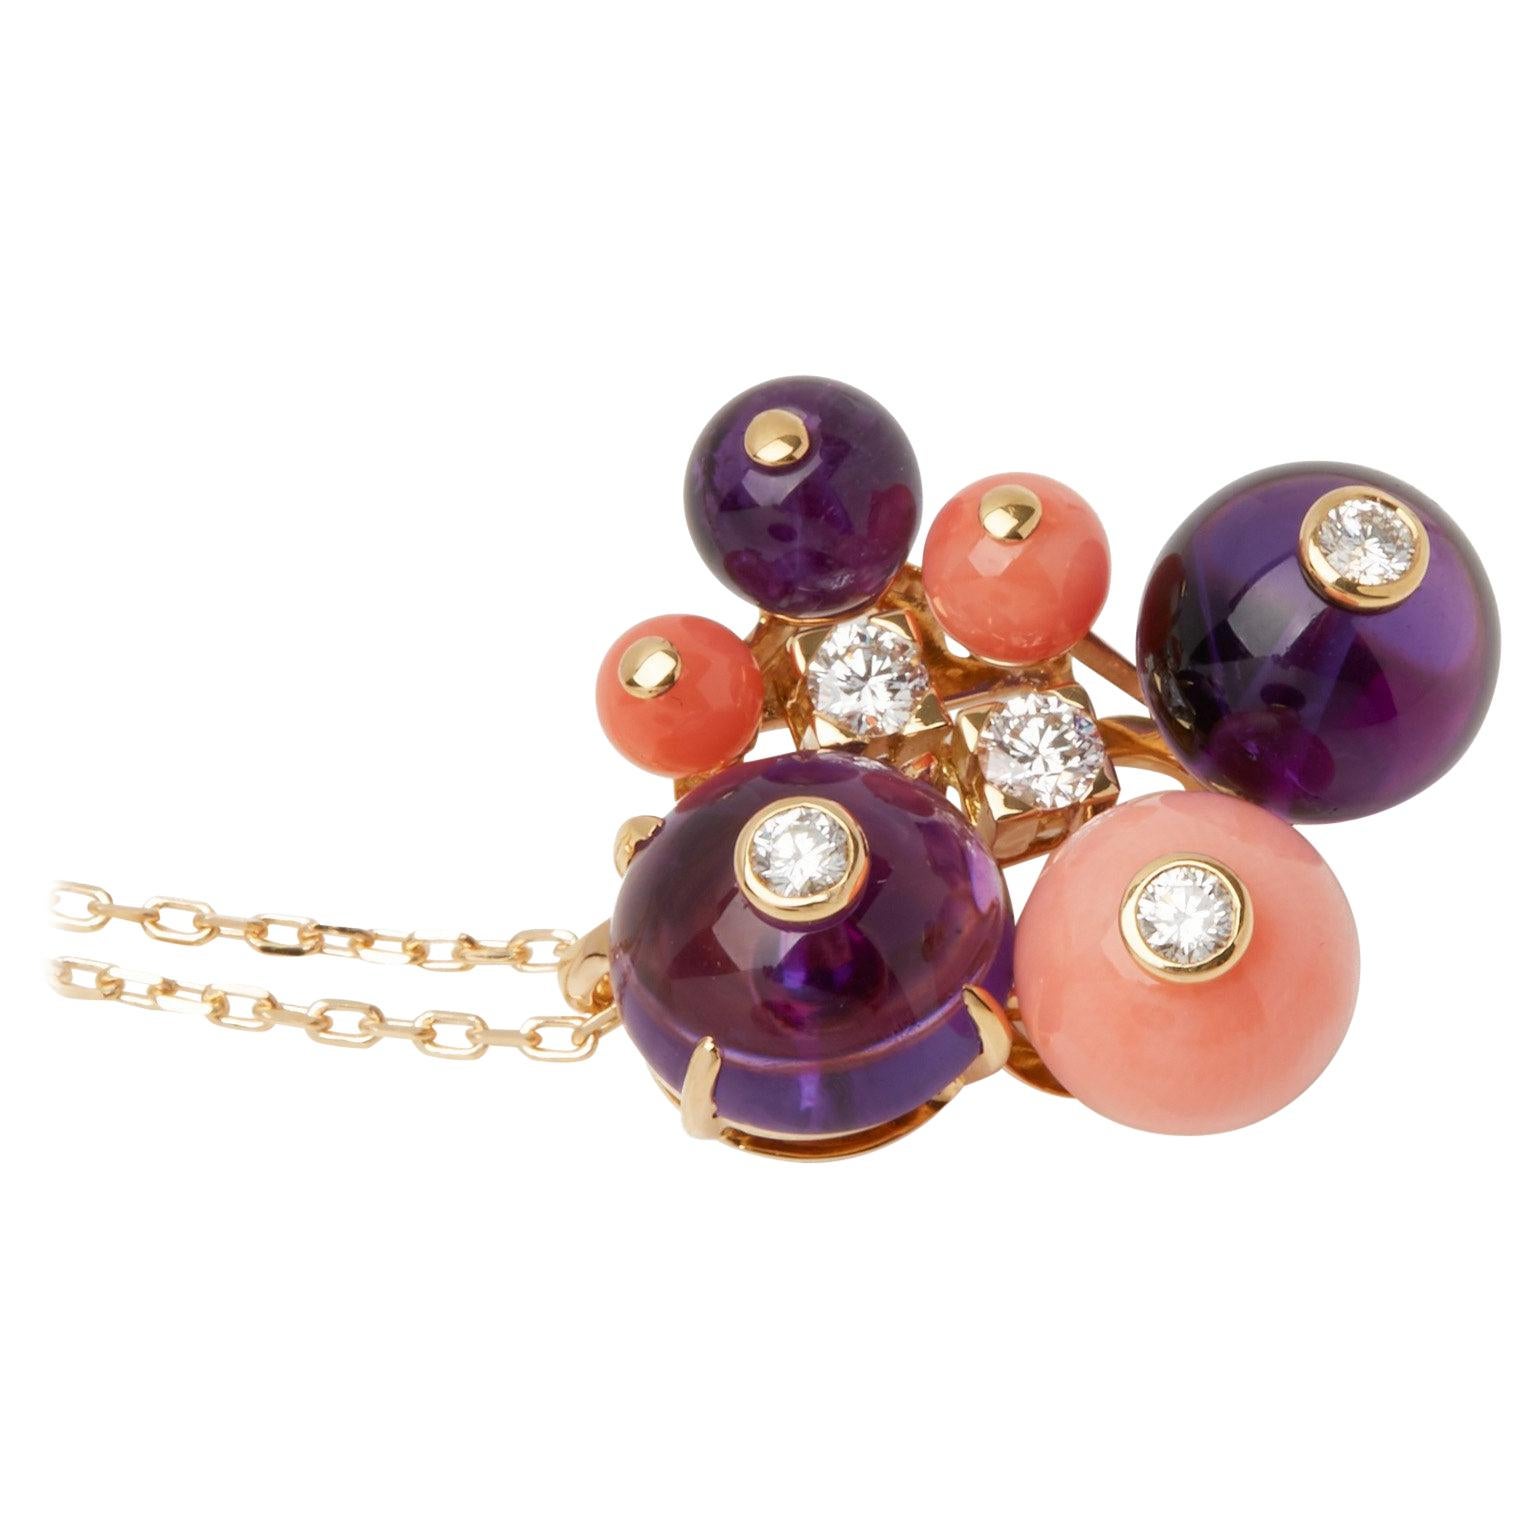 Cartier ‘Delice de Goa’ Necklace with Amethyst, Diamonds and Coral in 18K Gold